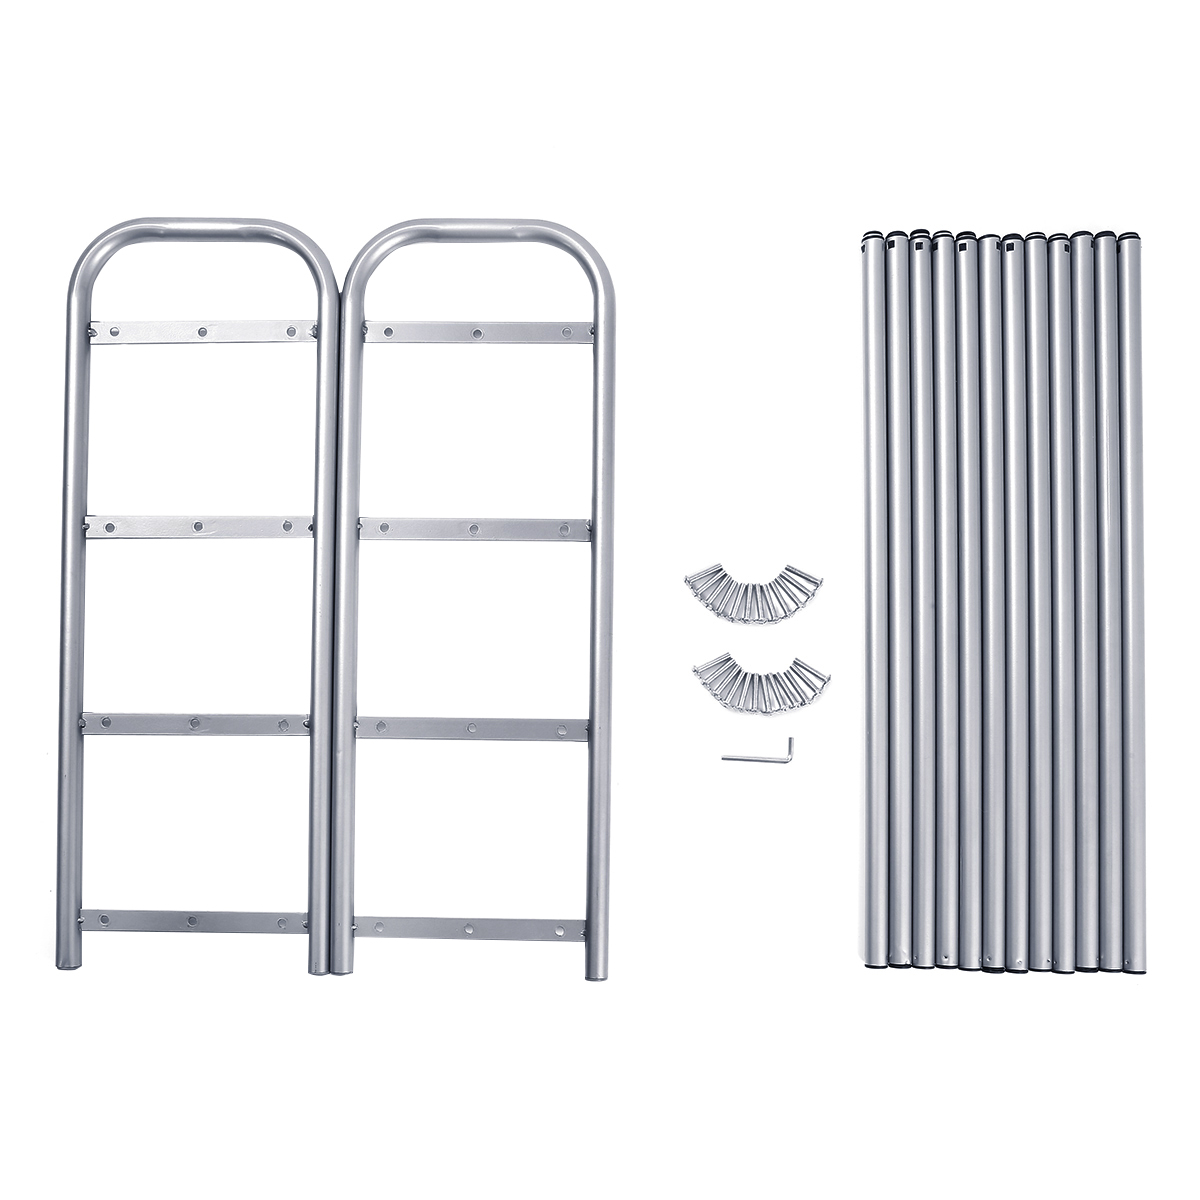 

GEMITTO Silver Grey 4 Layers Extendable Shoe Organiser Racks Heavy Duty Shoe Stand Storage